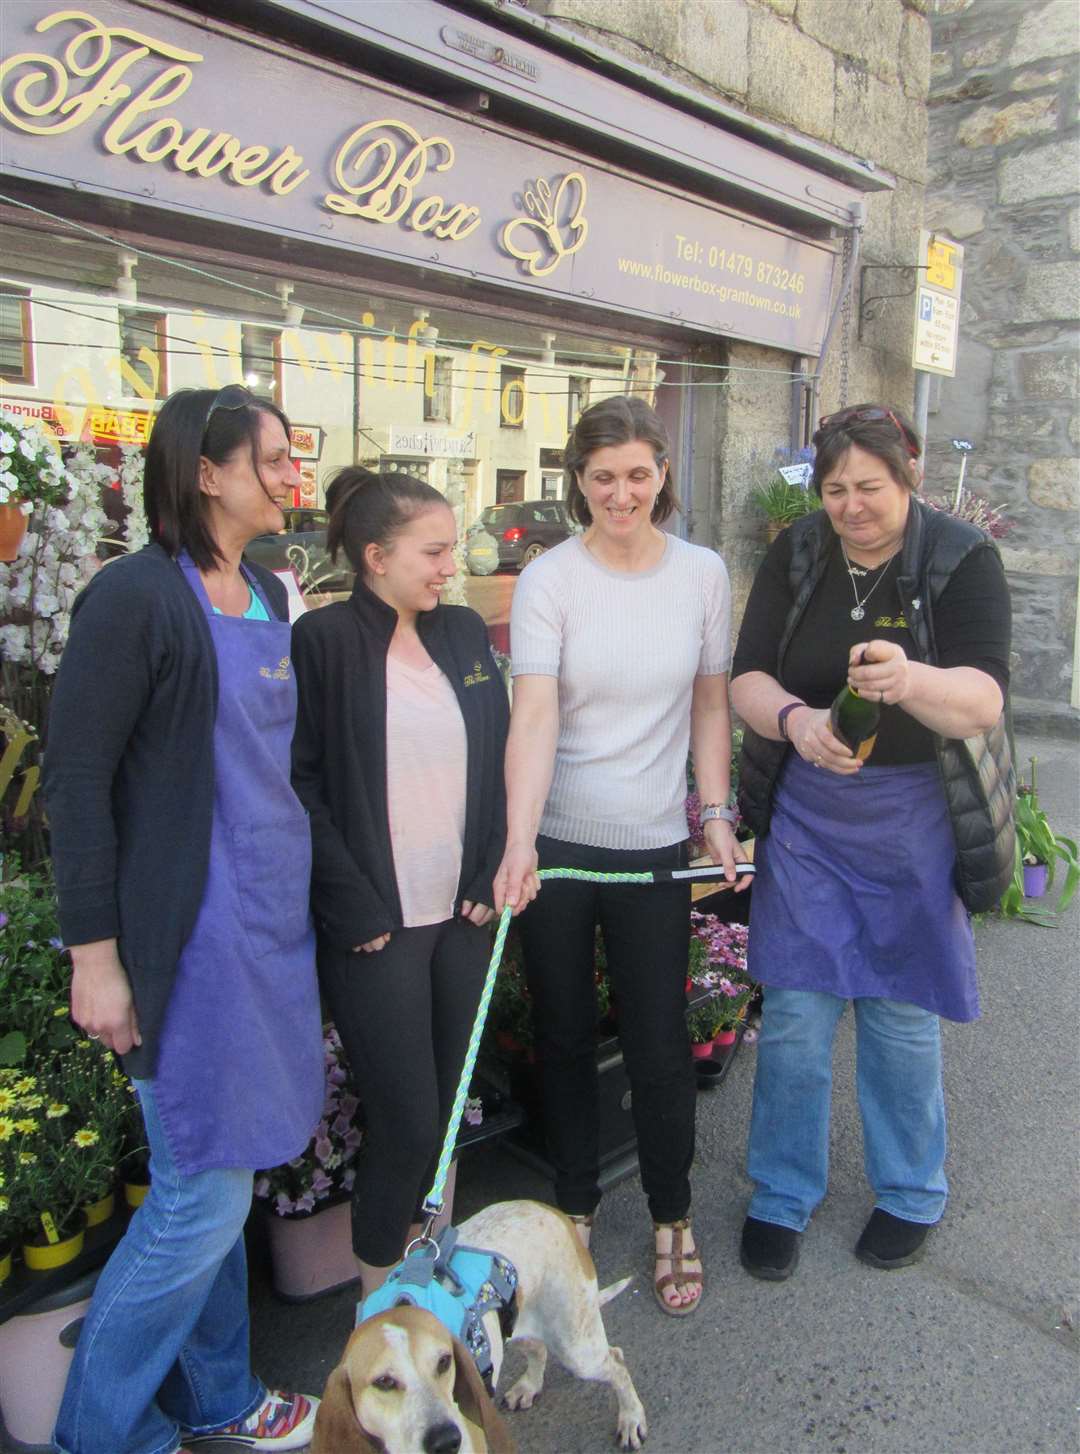 Will the champagne pop again this year? Maria Norman (right) with (from left) Candace and Sophie MacLean, Jane Stevenson and Oliver, celebrate last year’s win. The Flower Box will find out if it has won again on Tuesday.